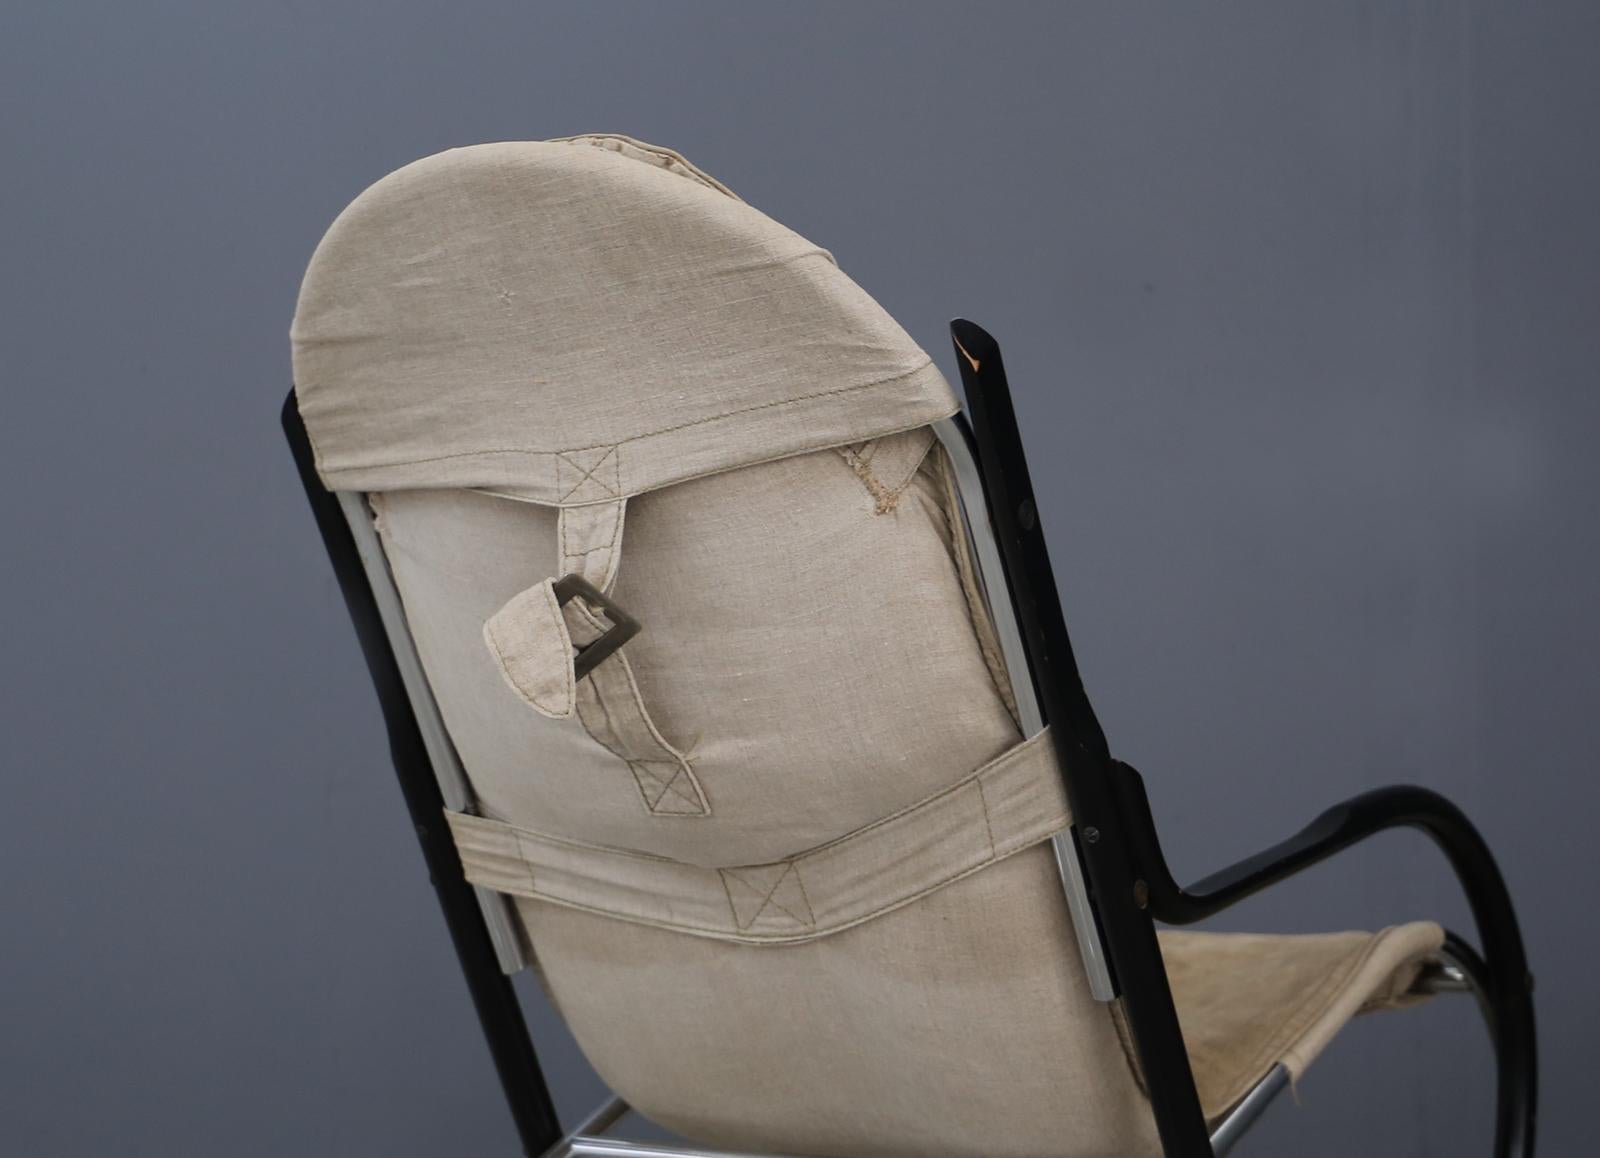 Late 20th Century Nonna Rocking Chair Designed by Paul Tuttle for Strassle International